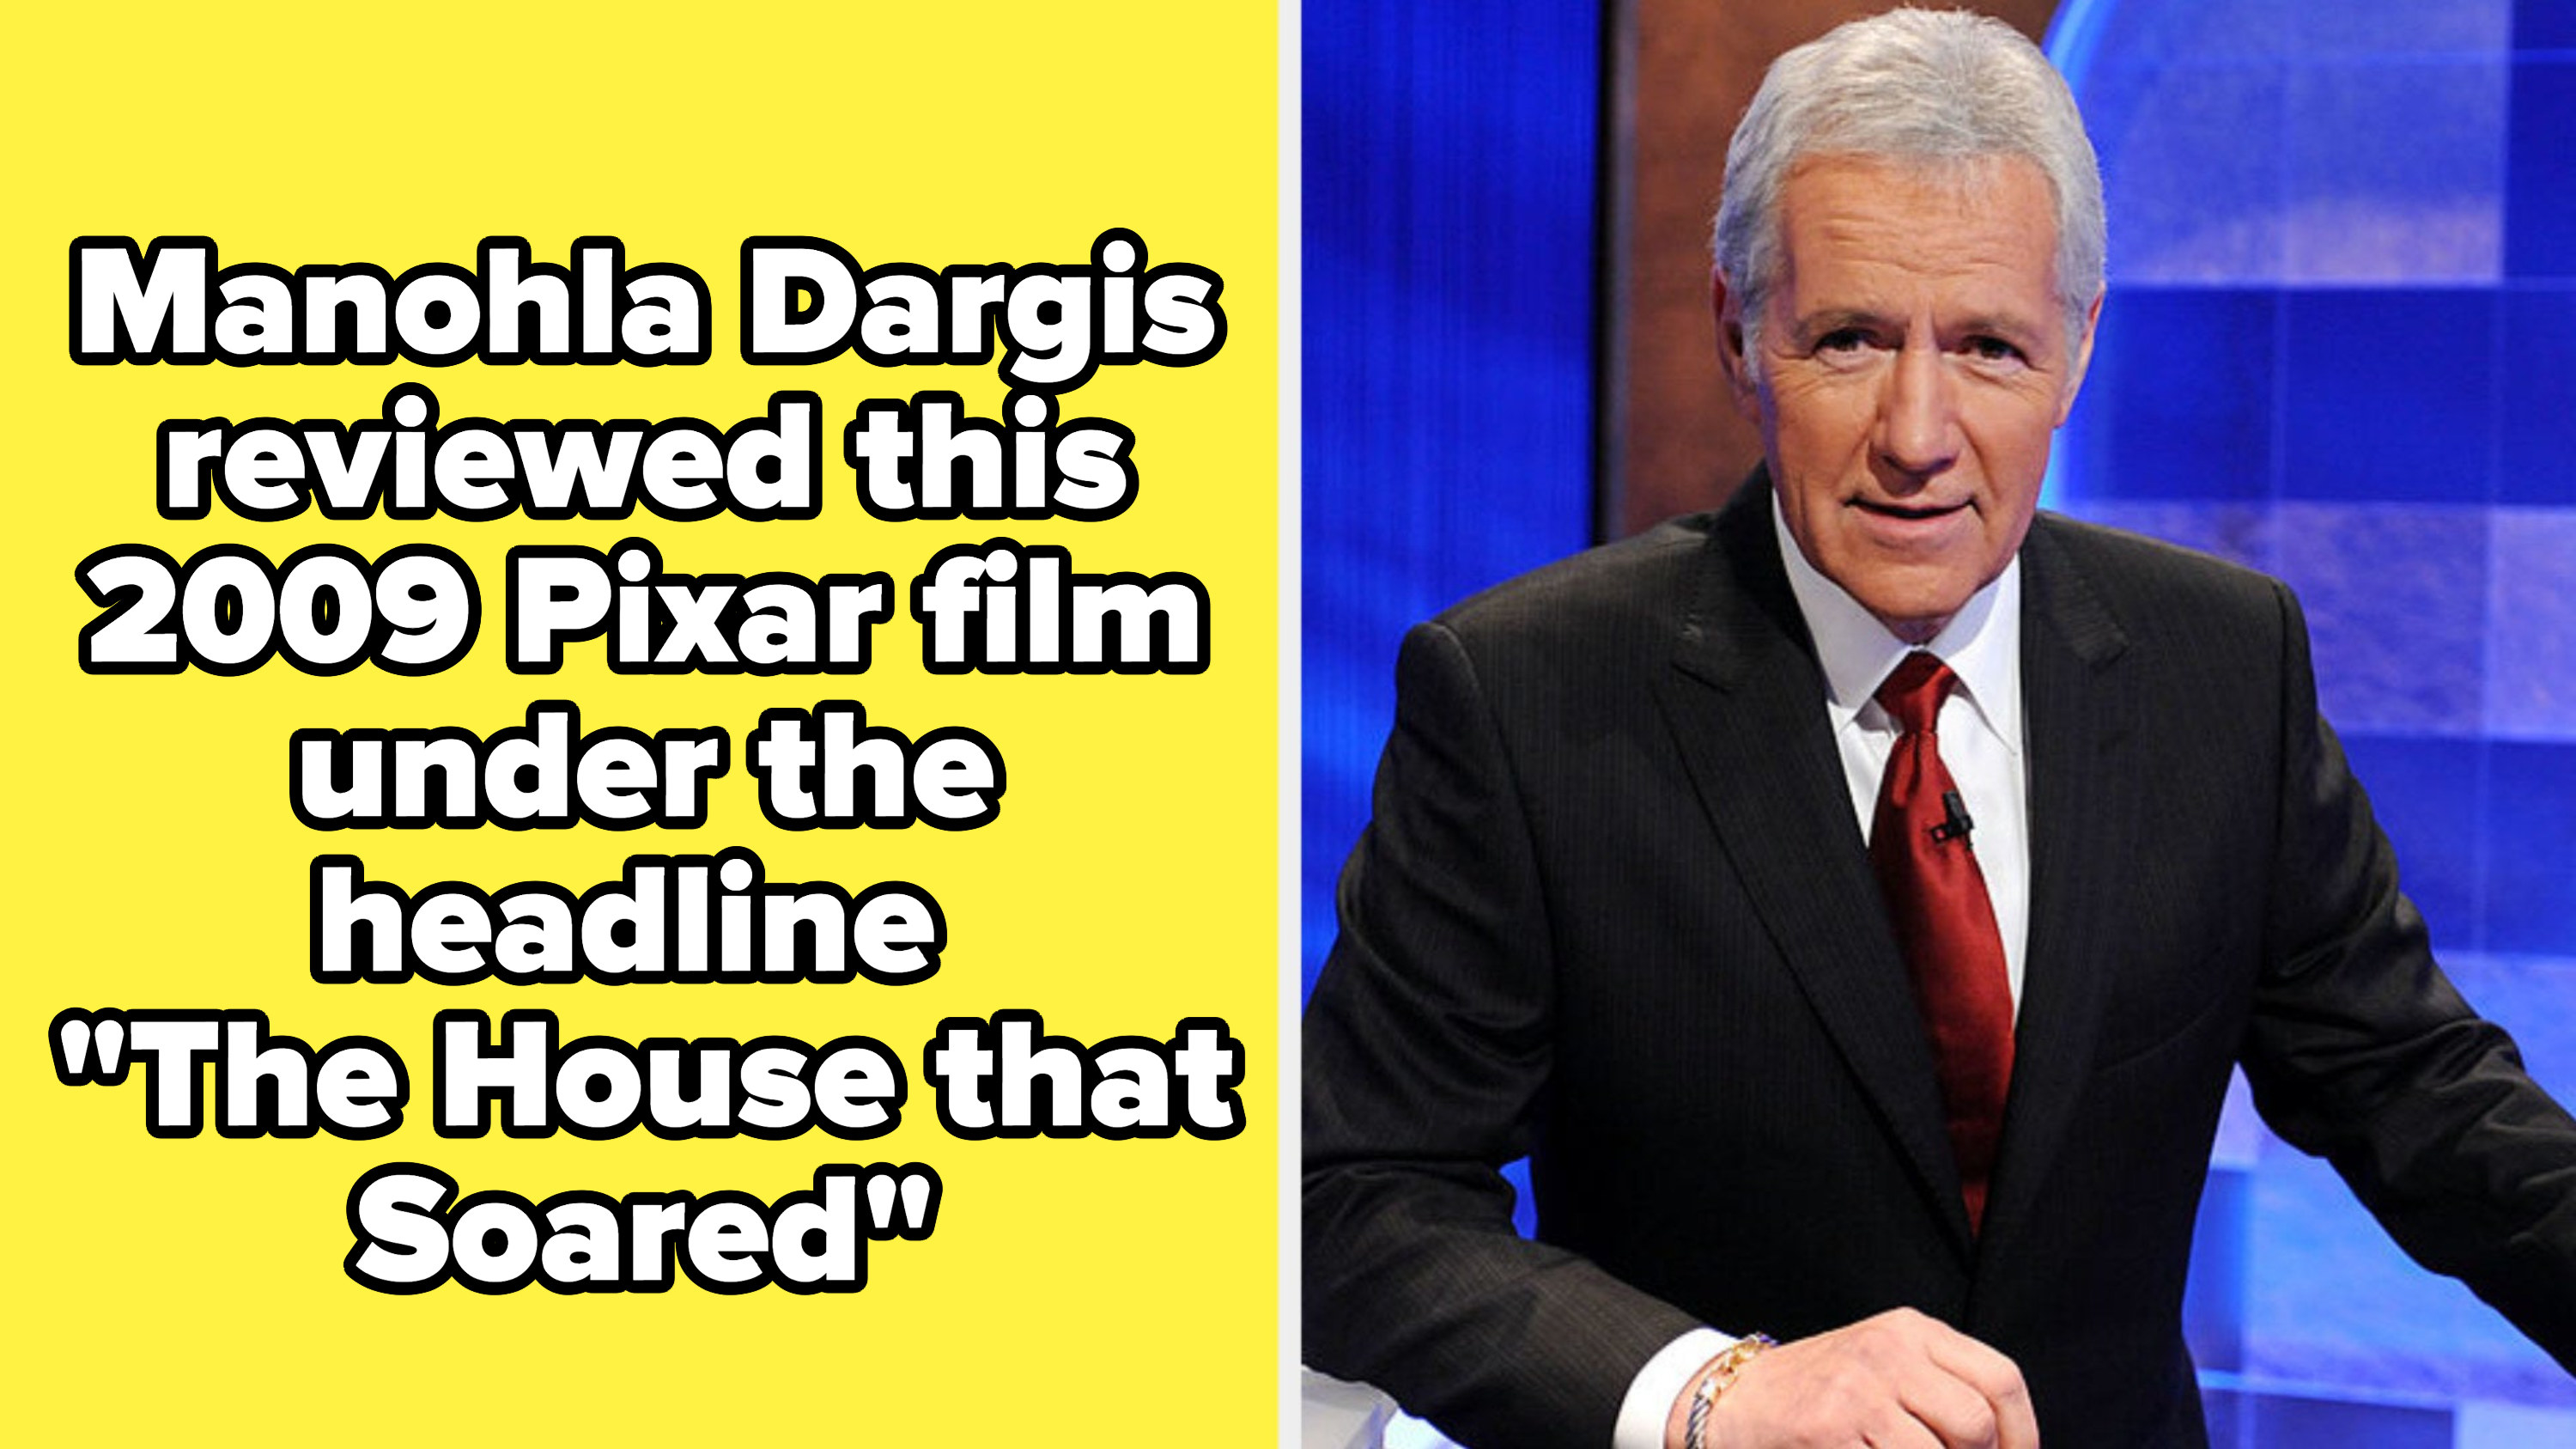 A &quot;Jeopardy!&quot; clue that reads: &quot;Manohla Dargis reviewed this 2009 Pixar film under the headline &#x27;The House that Soared;&#x27;&quot; a picture of Alex Trebek hosting &quot;Jeopardy!&quot;